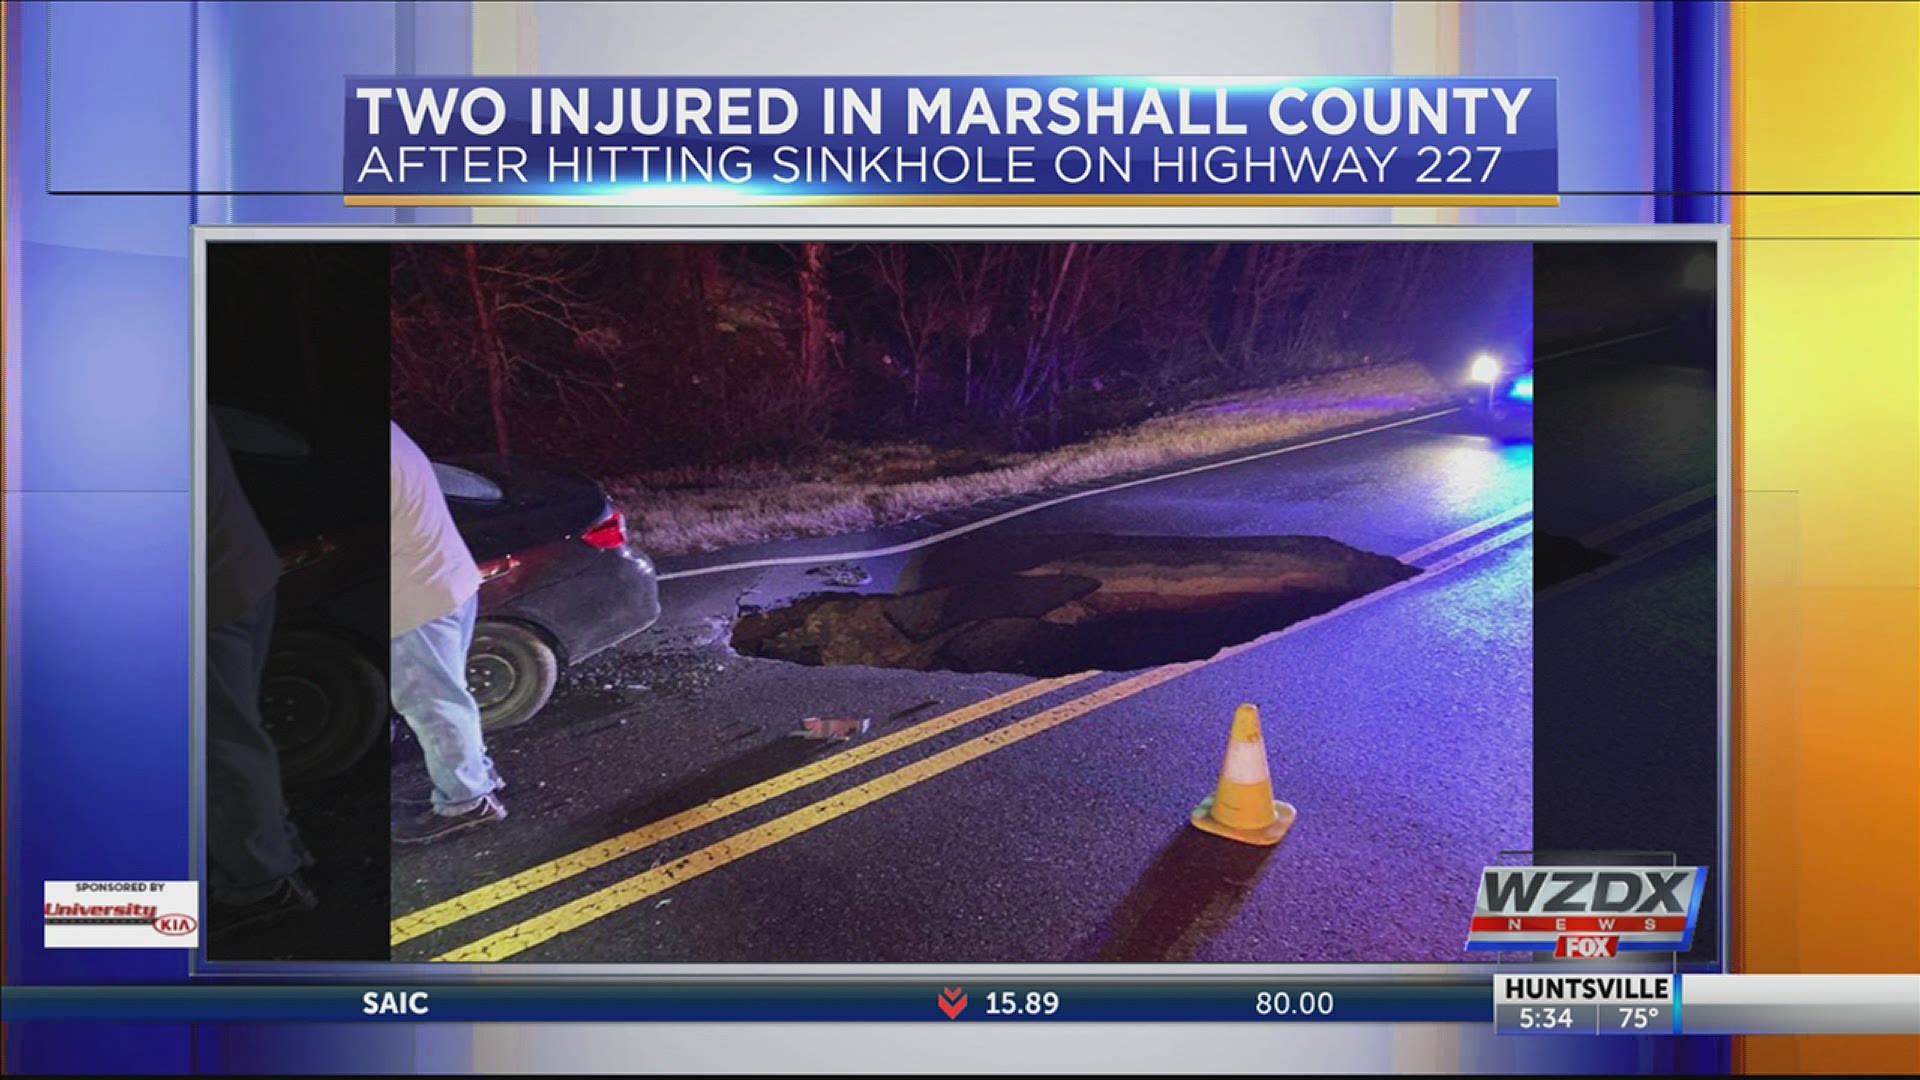 Two people were injured after their car hit a sinkhole in Morgan County after heavy rains.